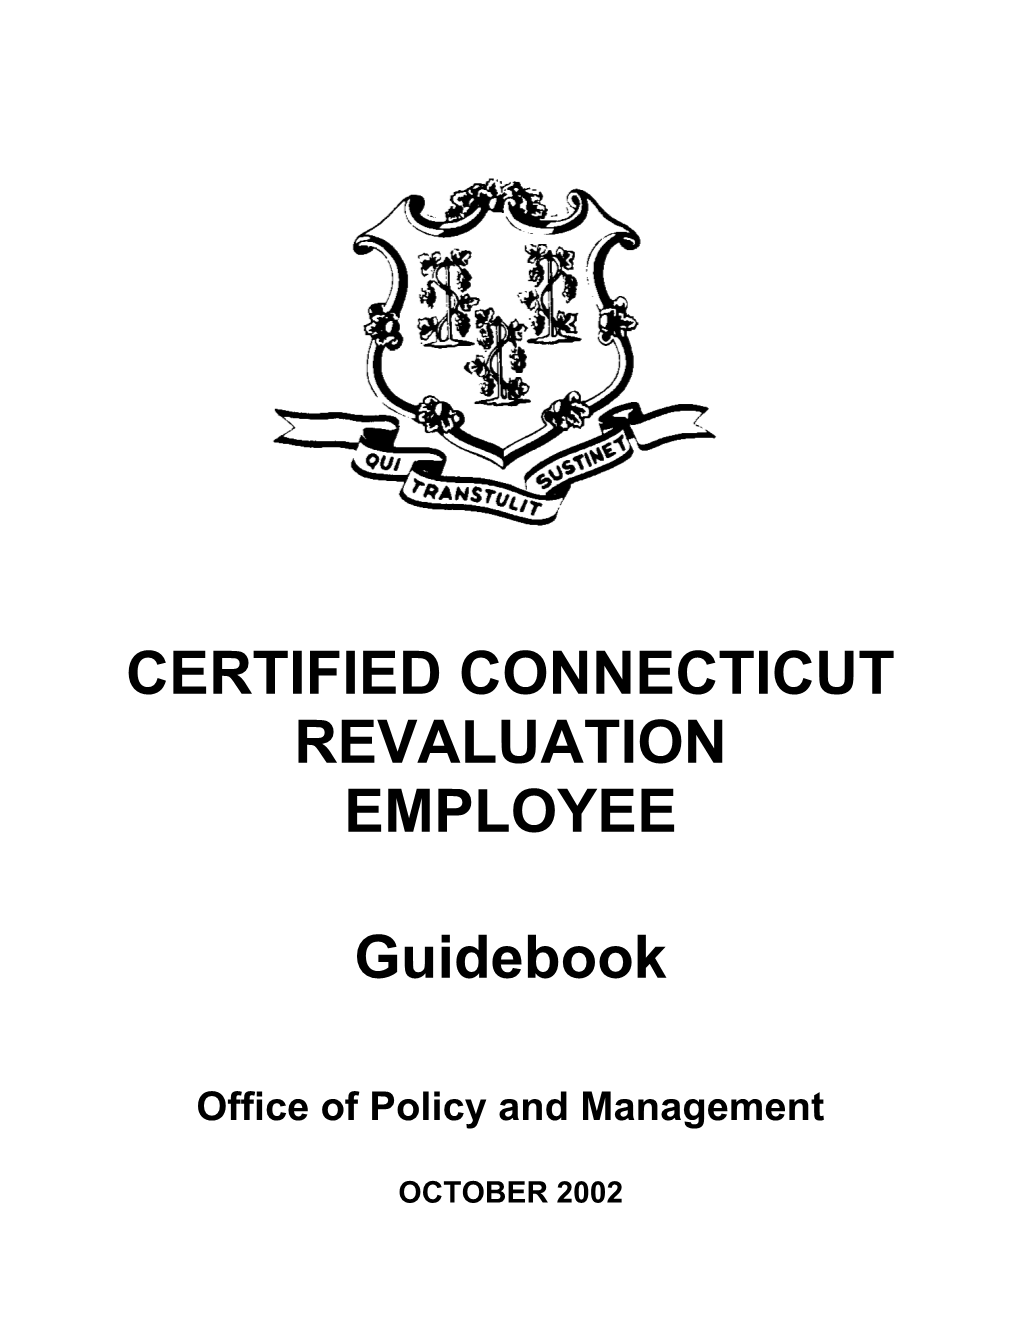 Certified Connecticut Revaluation Employee